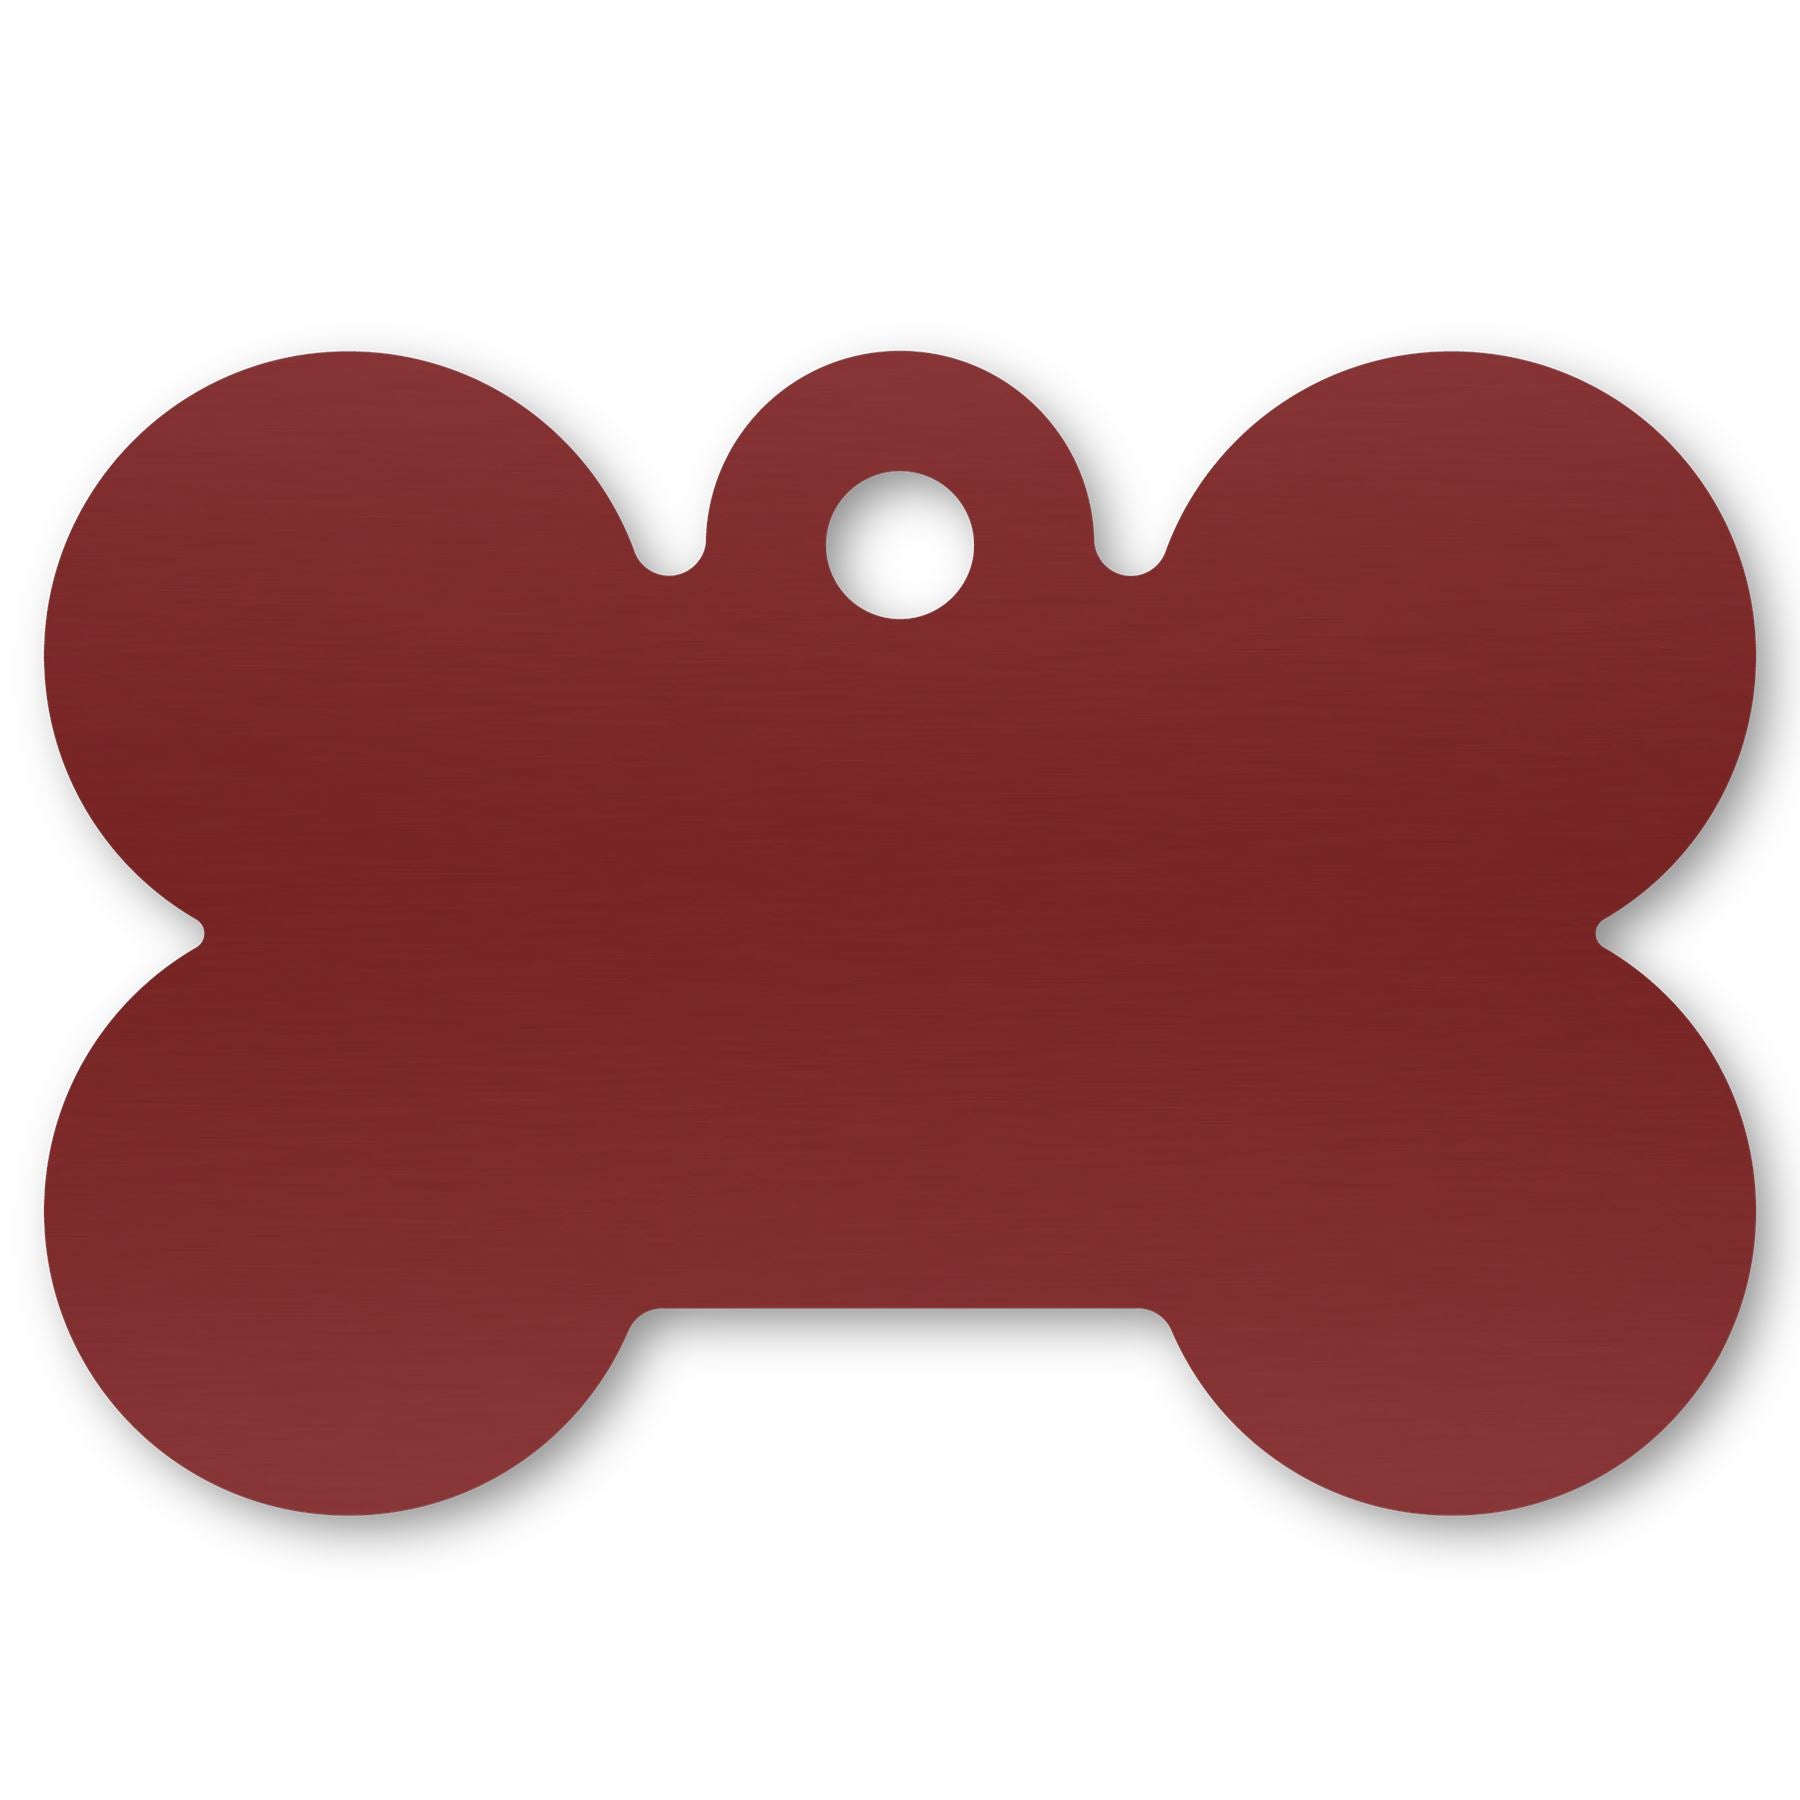 Anodized Aluminum Dog Bone Shaped Tags, 1-1/16" x 1-9/16" with 1/8" Hole, Laser Engraved Metal Tags Craftworks NW Red 